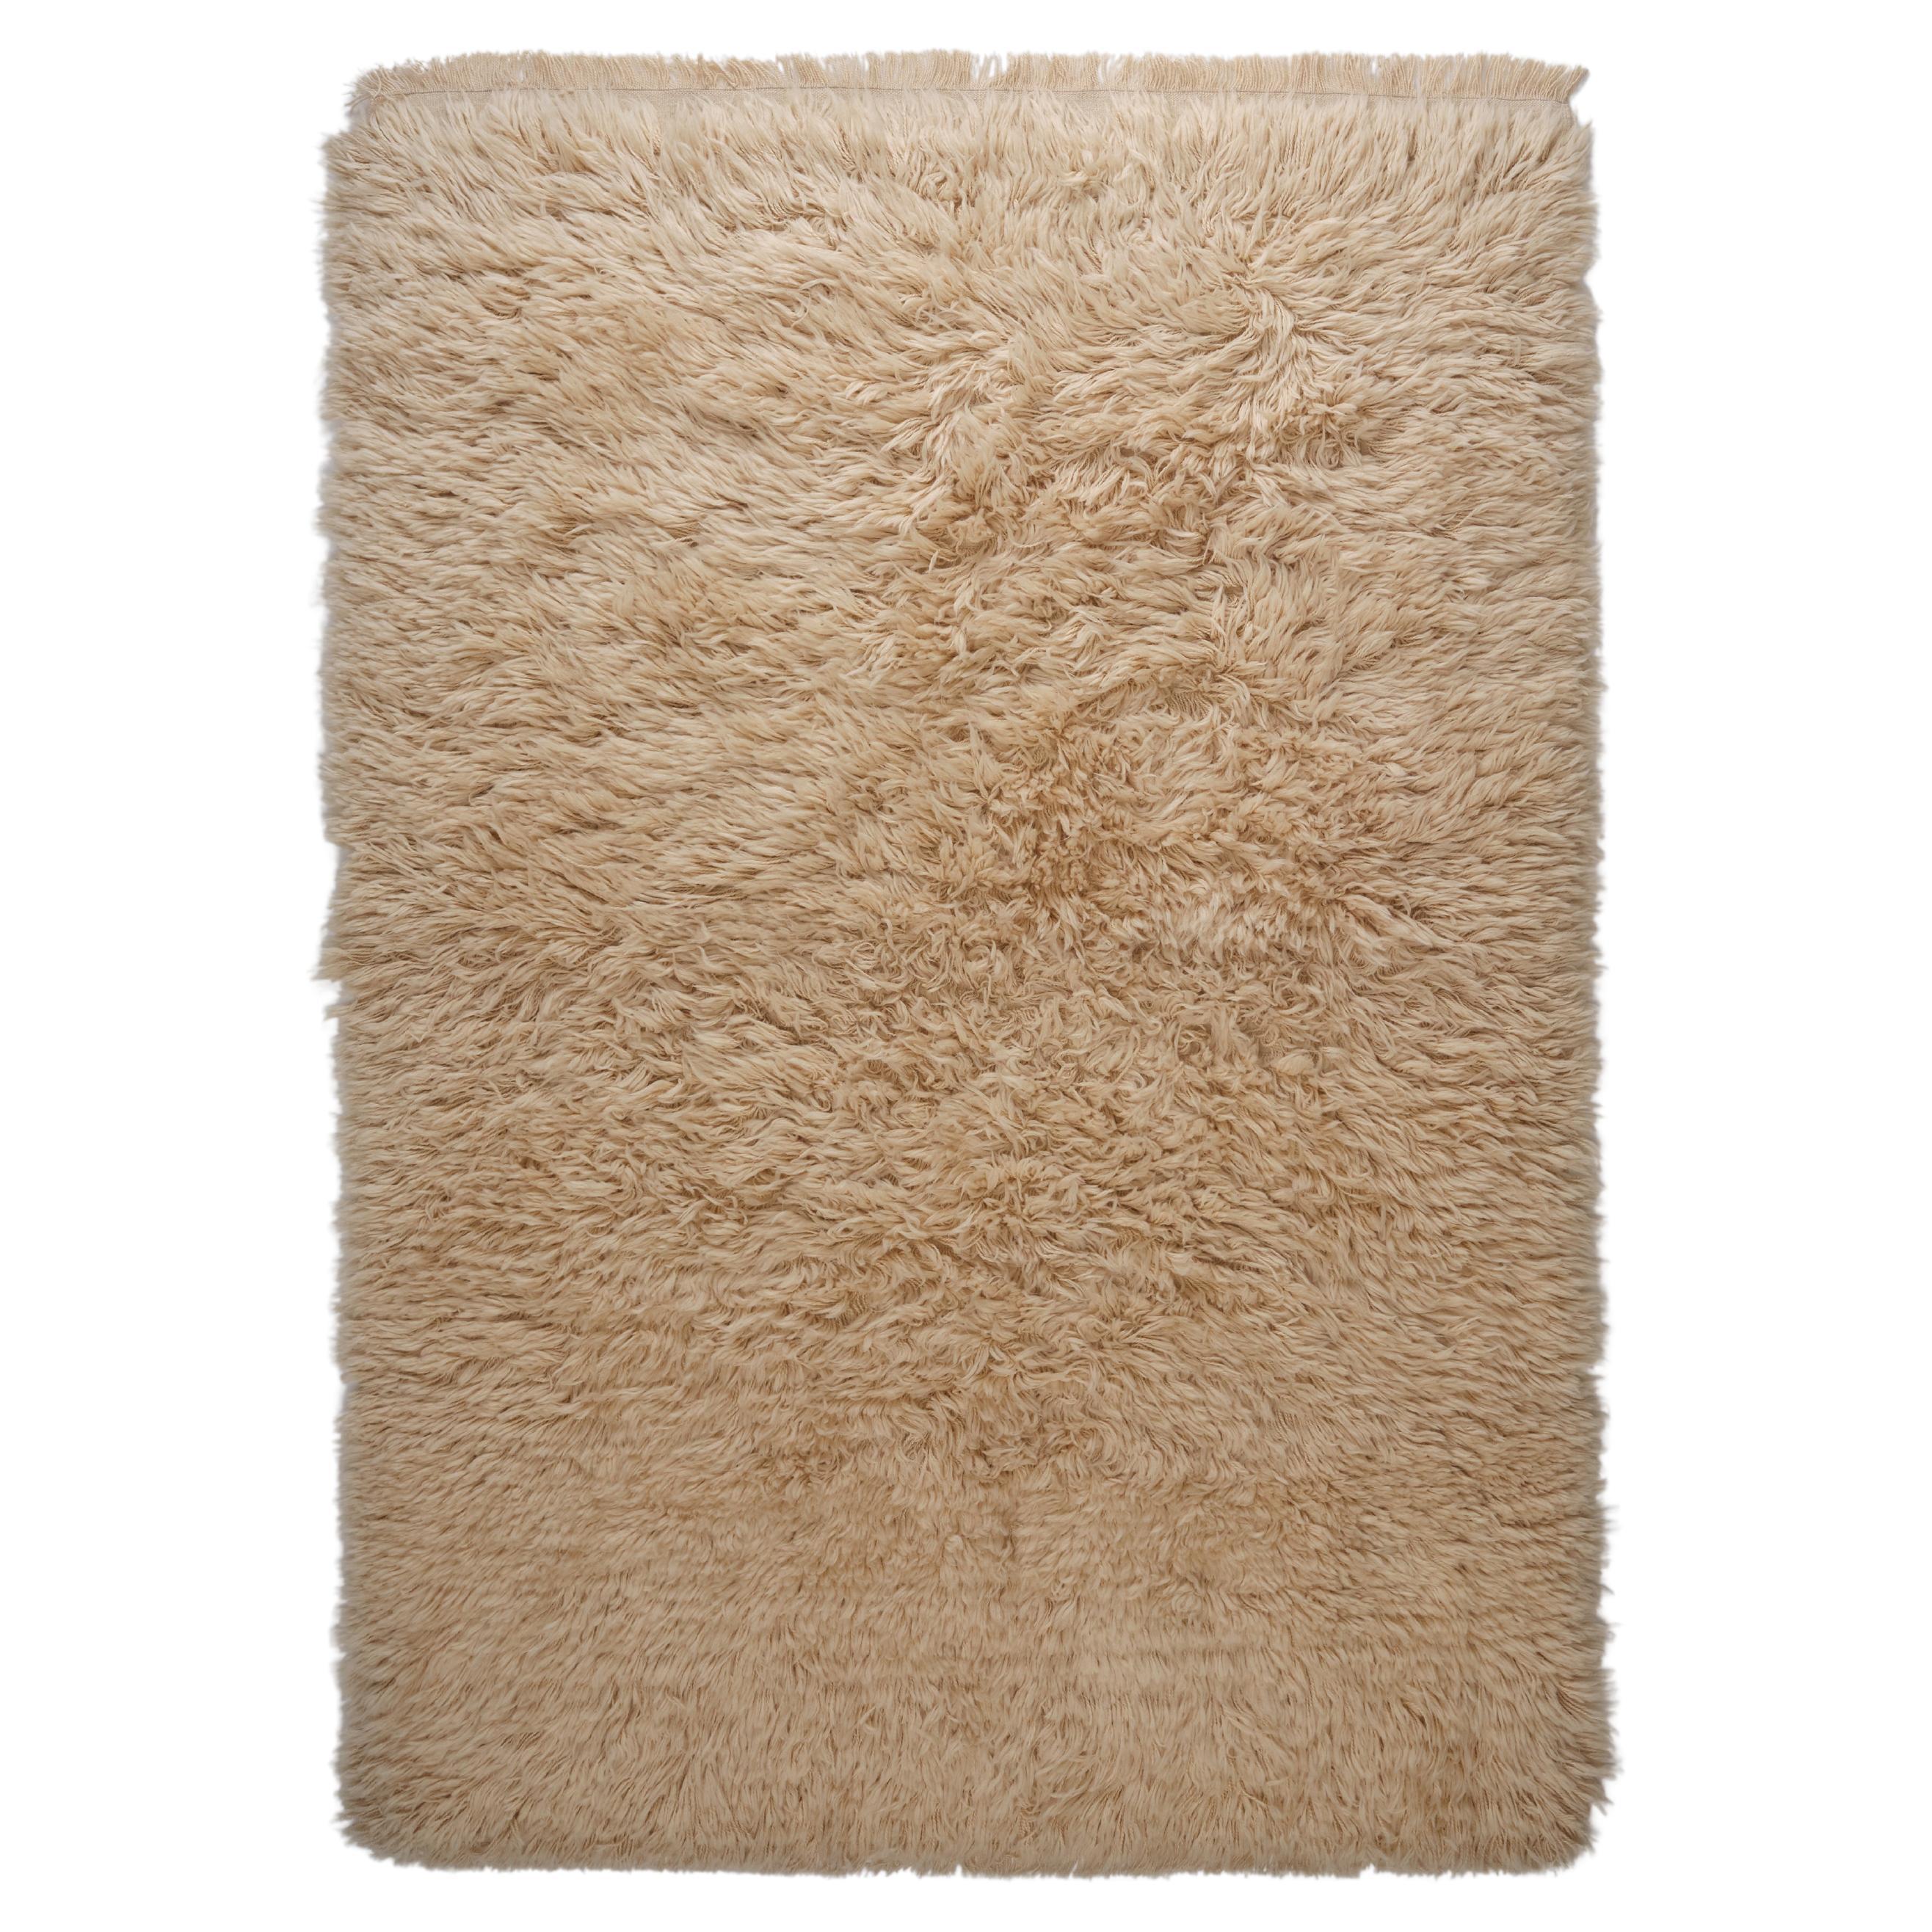 The Forsyth Woolly Shag Rug - Natural, 6x9 For Sale